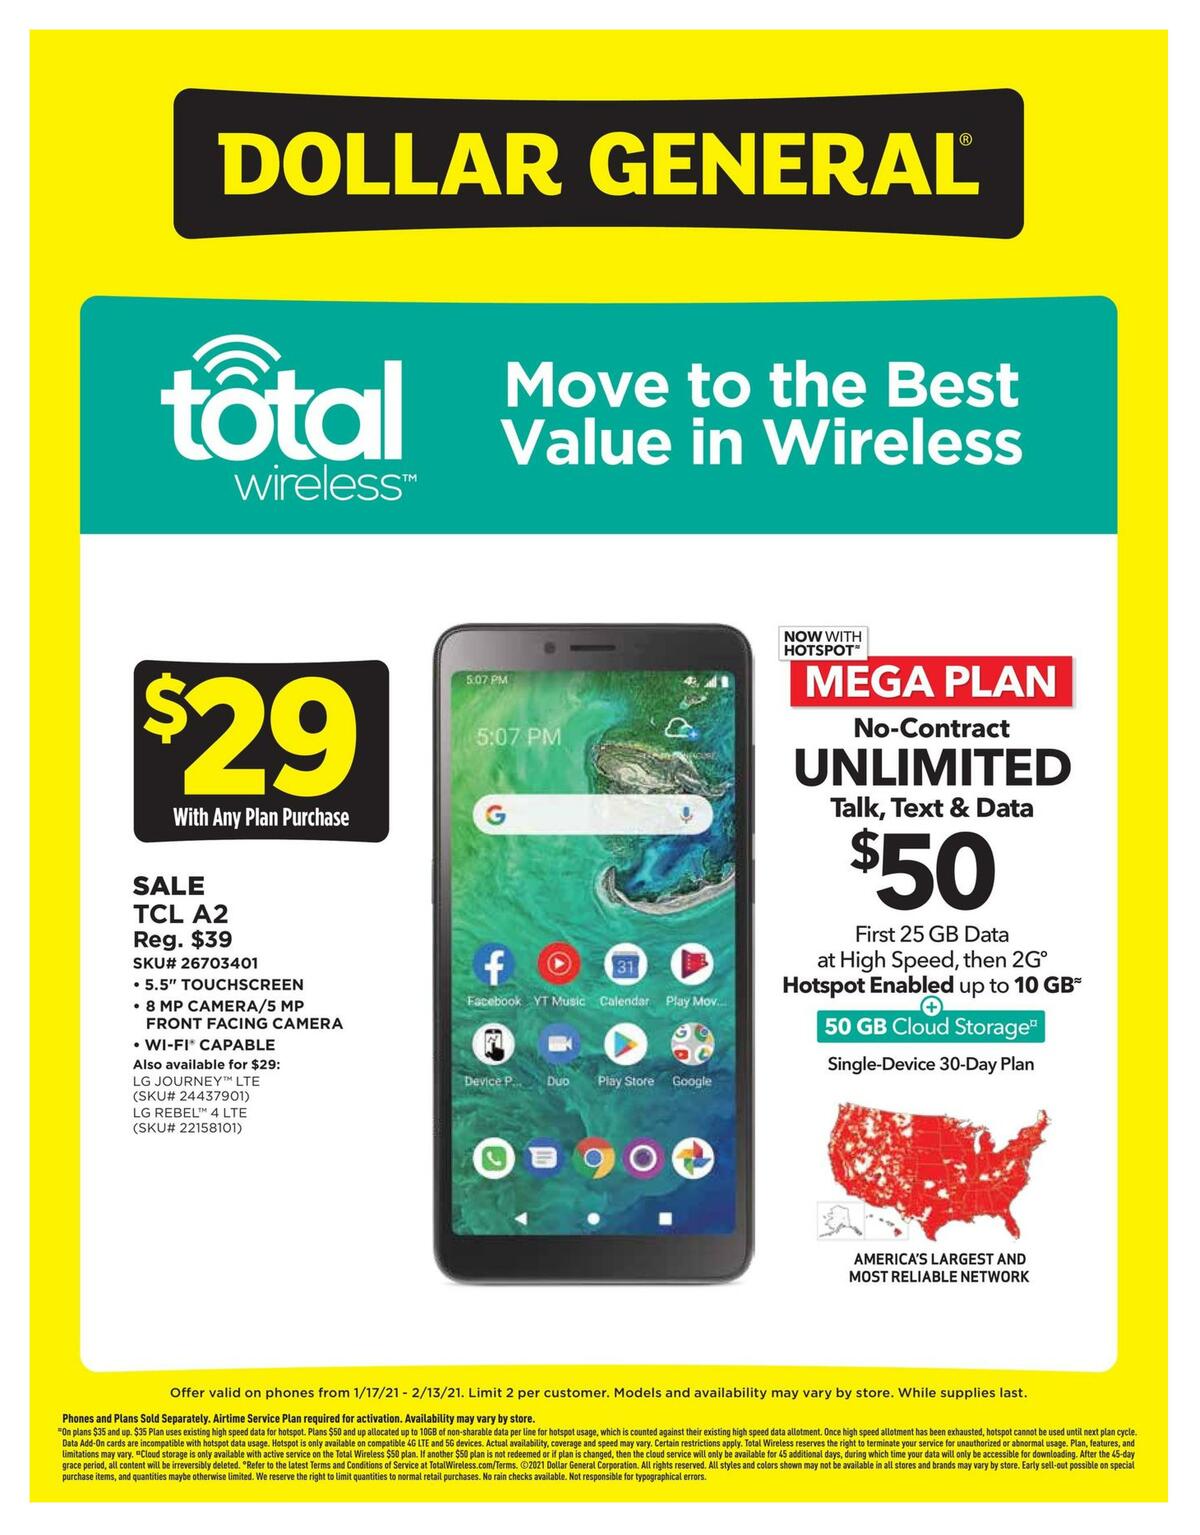 Dollar General Weekly Wireless Specials Weekly Ad from January 26